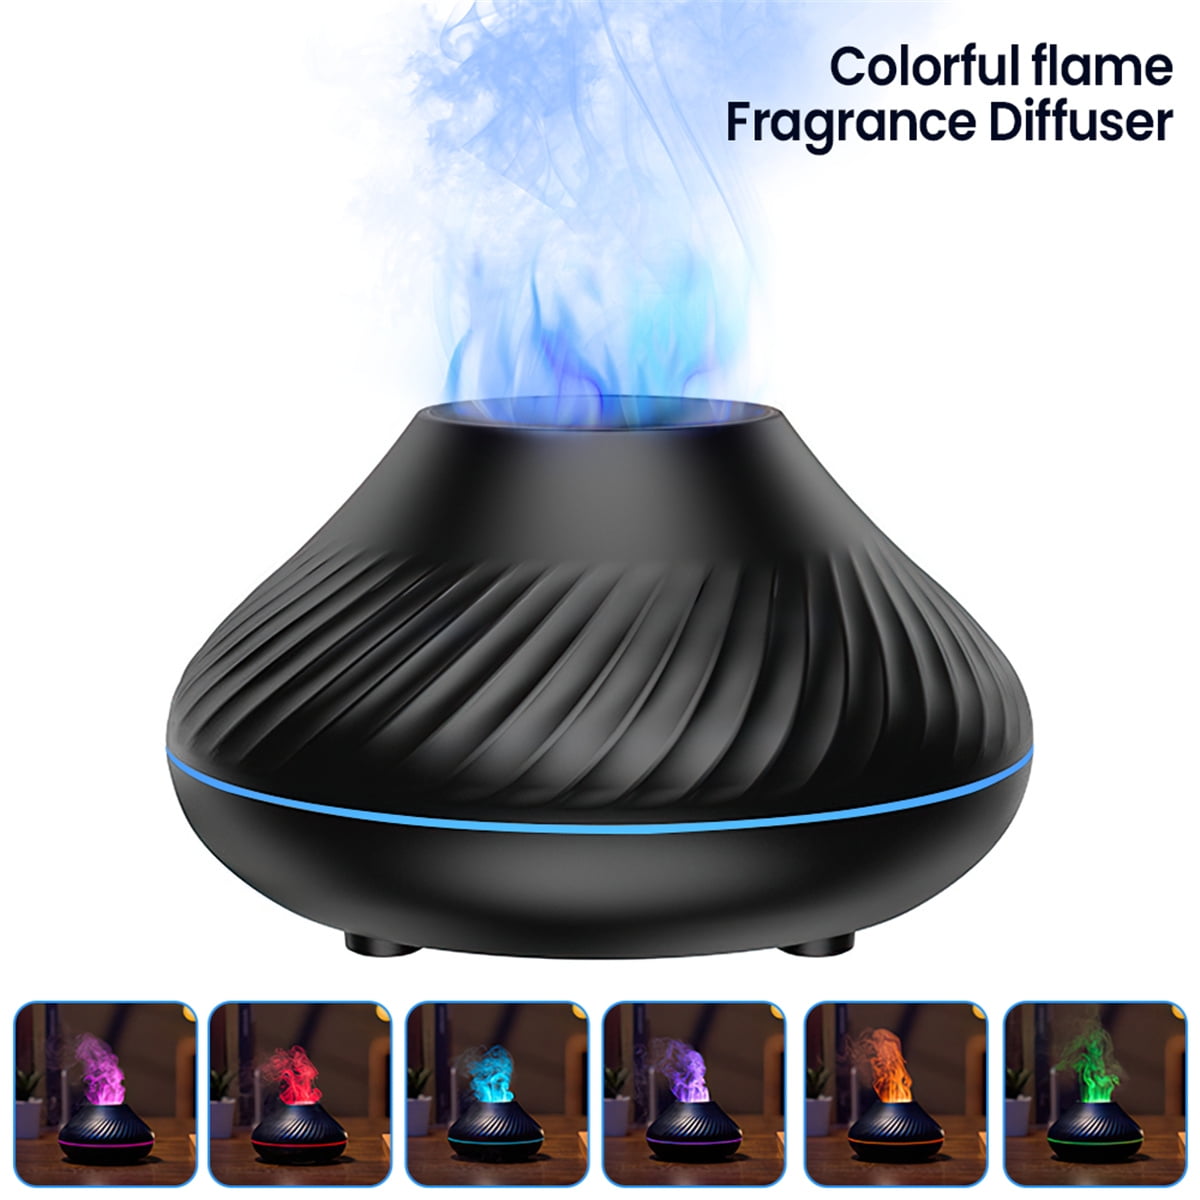 Smoke from Ultrasonic Aroma Diffuser and colorful light on black background.  Color Steam moving in dark. Real Artificial smoke in Colorful light on  black. Represent mood and tone feeling of Cyber punk